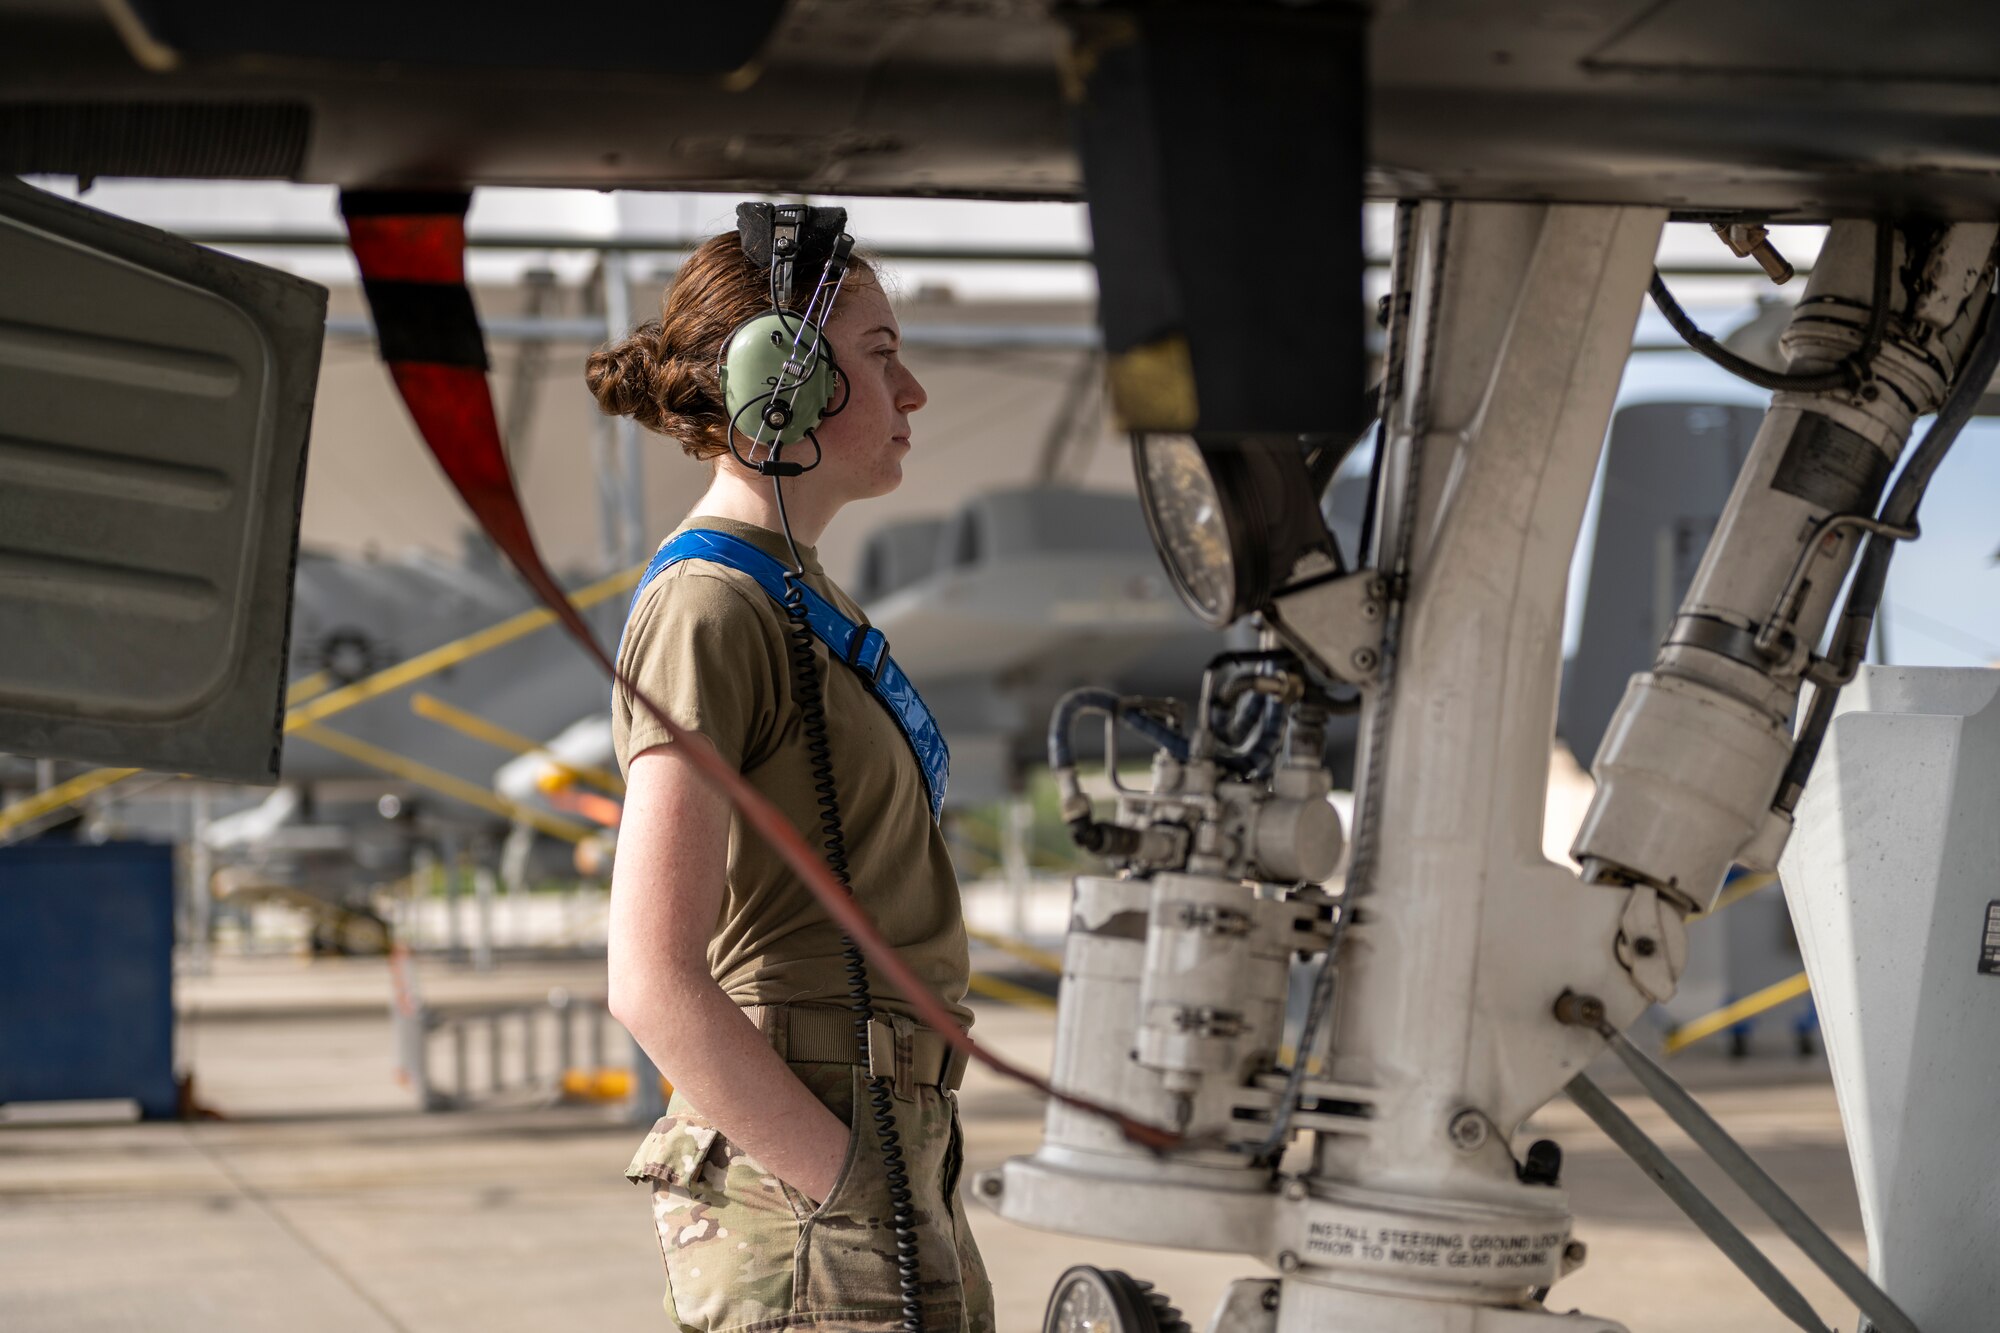 U.S. Air Force Airman Gabrielle Shipley, 74th Fighter Generation Squadron crew chief, prepares an A-10C Thunderbolt II to launch during Exercise Ready Tiger 24-1 from Moody Air Force Base, Georgia, April 10, 2024. The A-10 is designed for close air support of ground forces. The Ready Tiger 24-1 exercise evaluators will assess the 23rd Wing's proficiency in employing decentralized command and control to fulfill air tasking orders across geographically dispersed areas amid communication challenges. (U.S. Air Force photo by Senior Airman Deanna Muir)